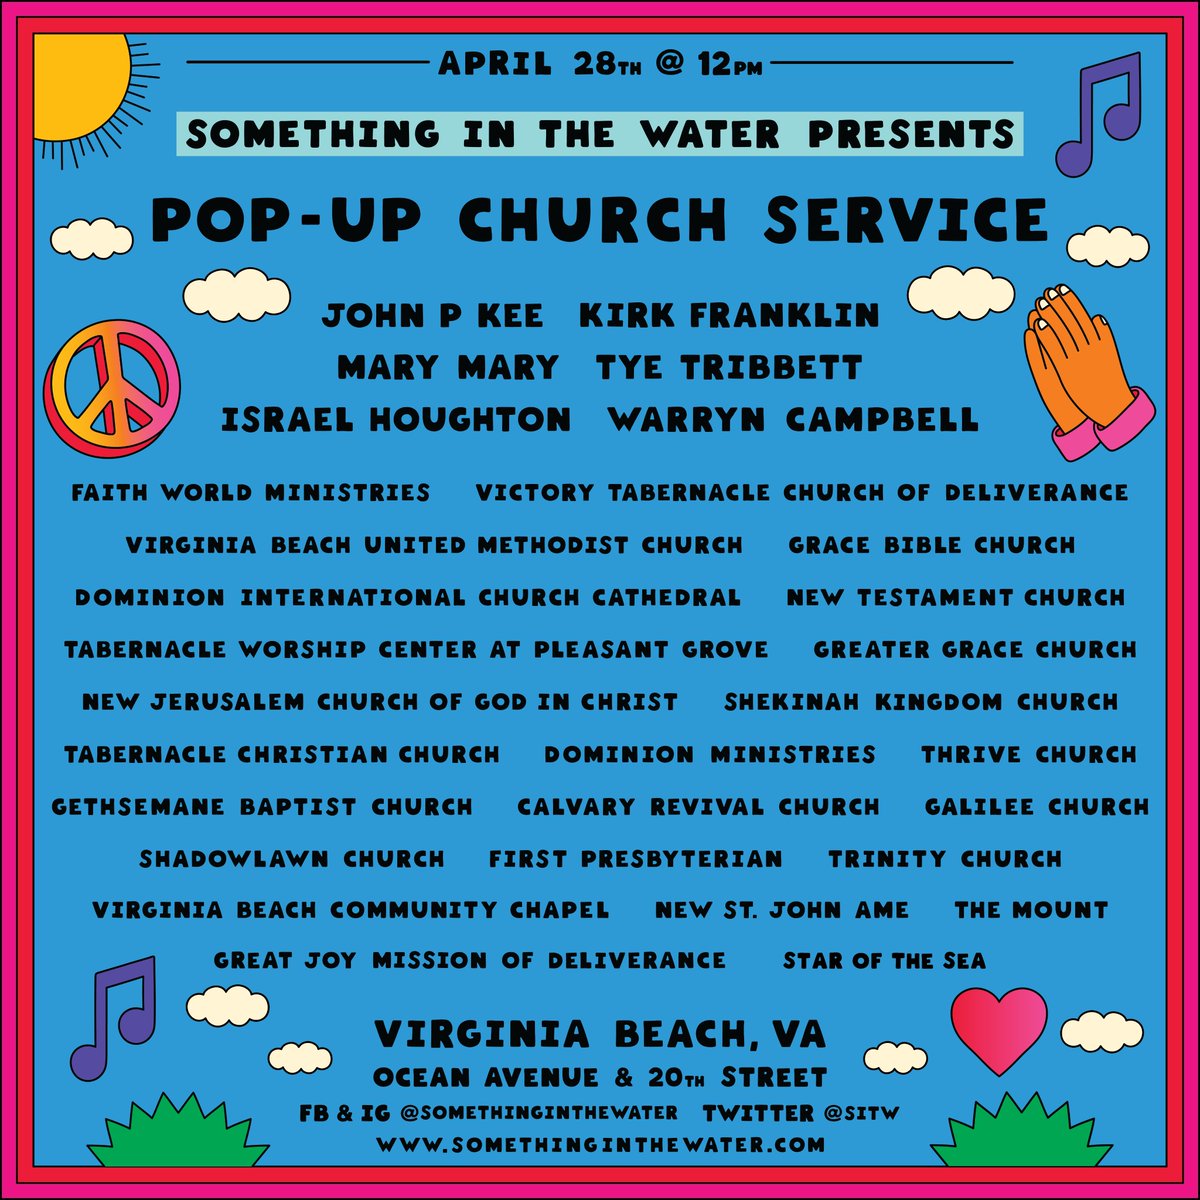 RT @sitw: The #SITWfest Pop-Up Church lineup is HERE! Happening on Sunday of the festival. Come join us ???????? https://t.co/CtWmGeOfWR